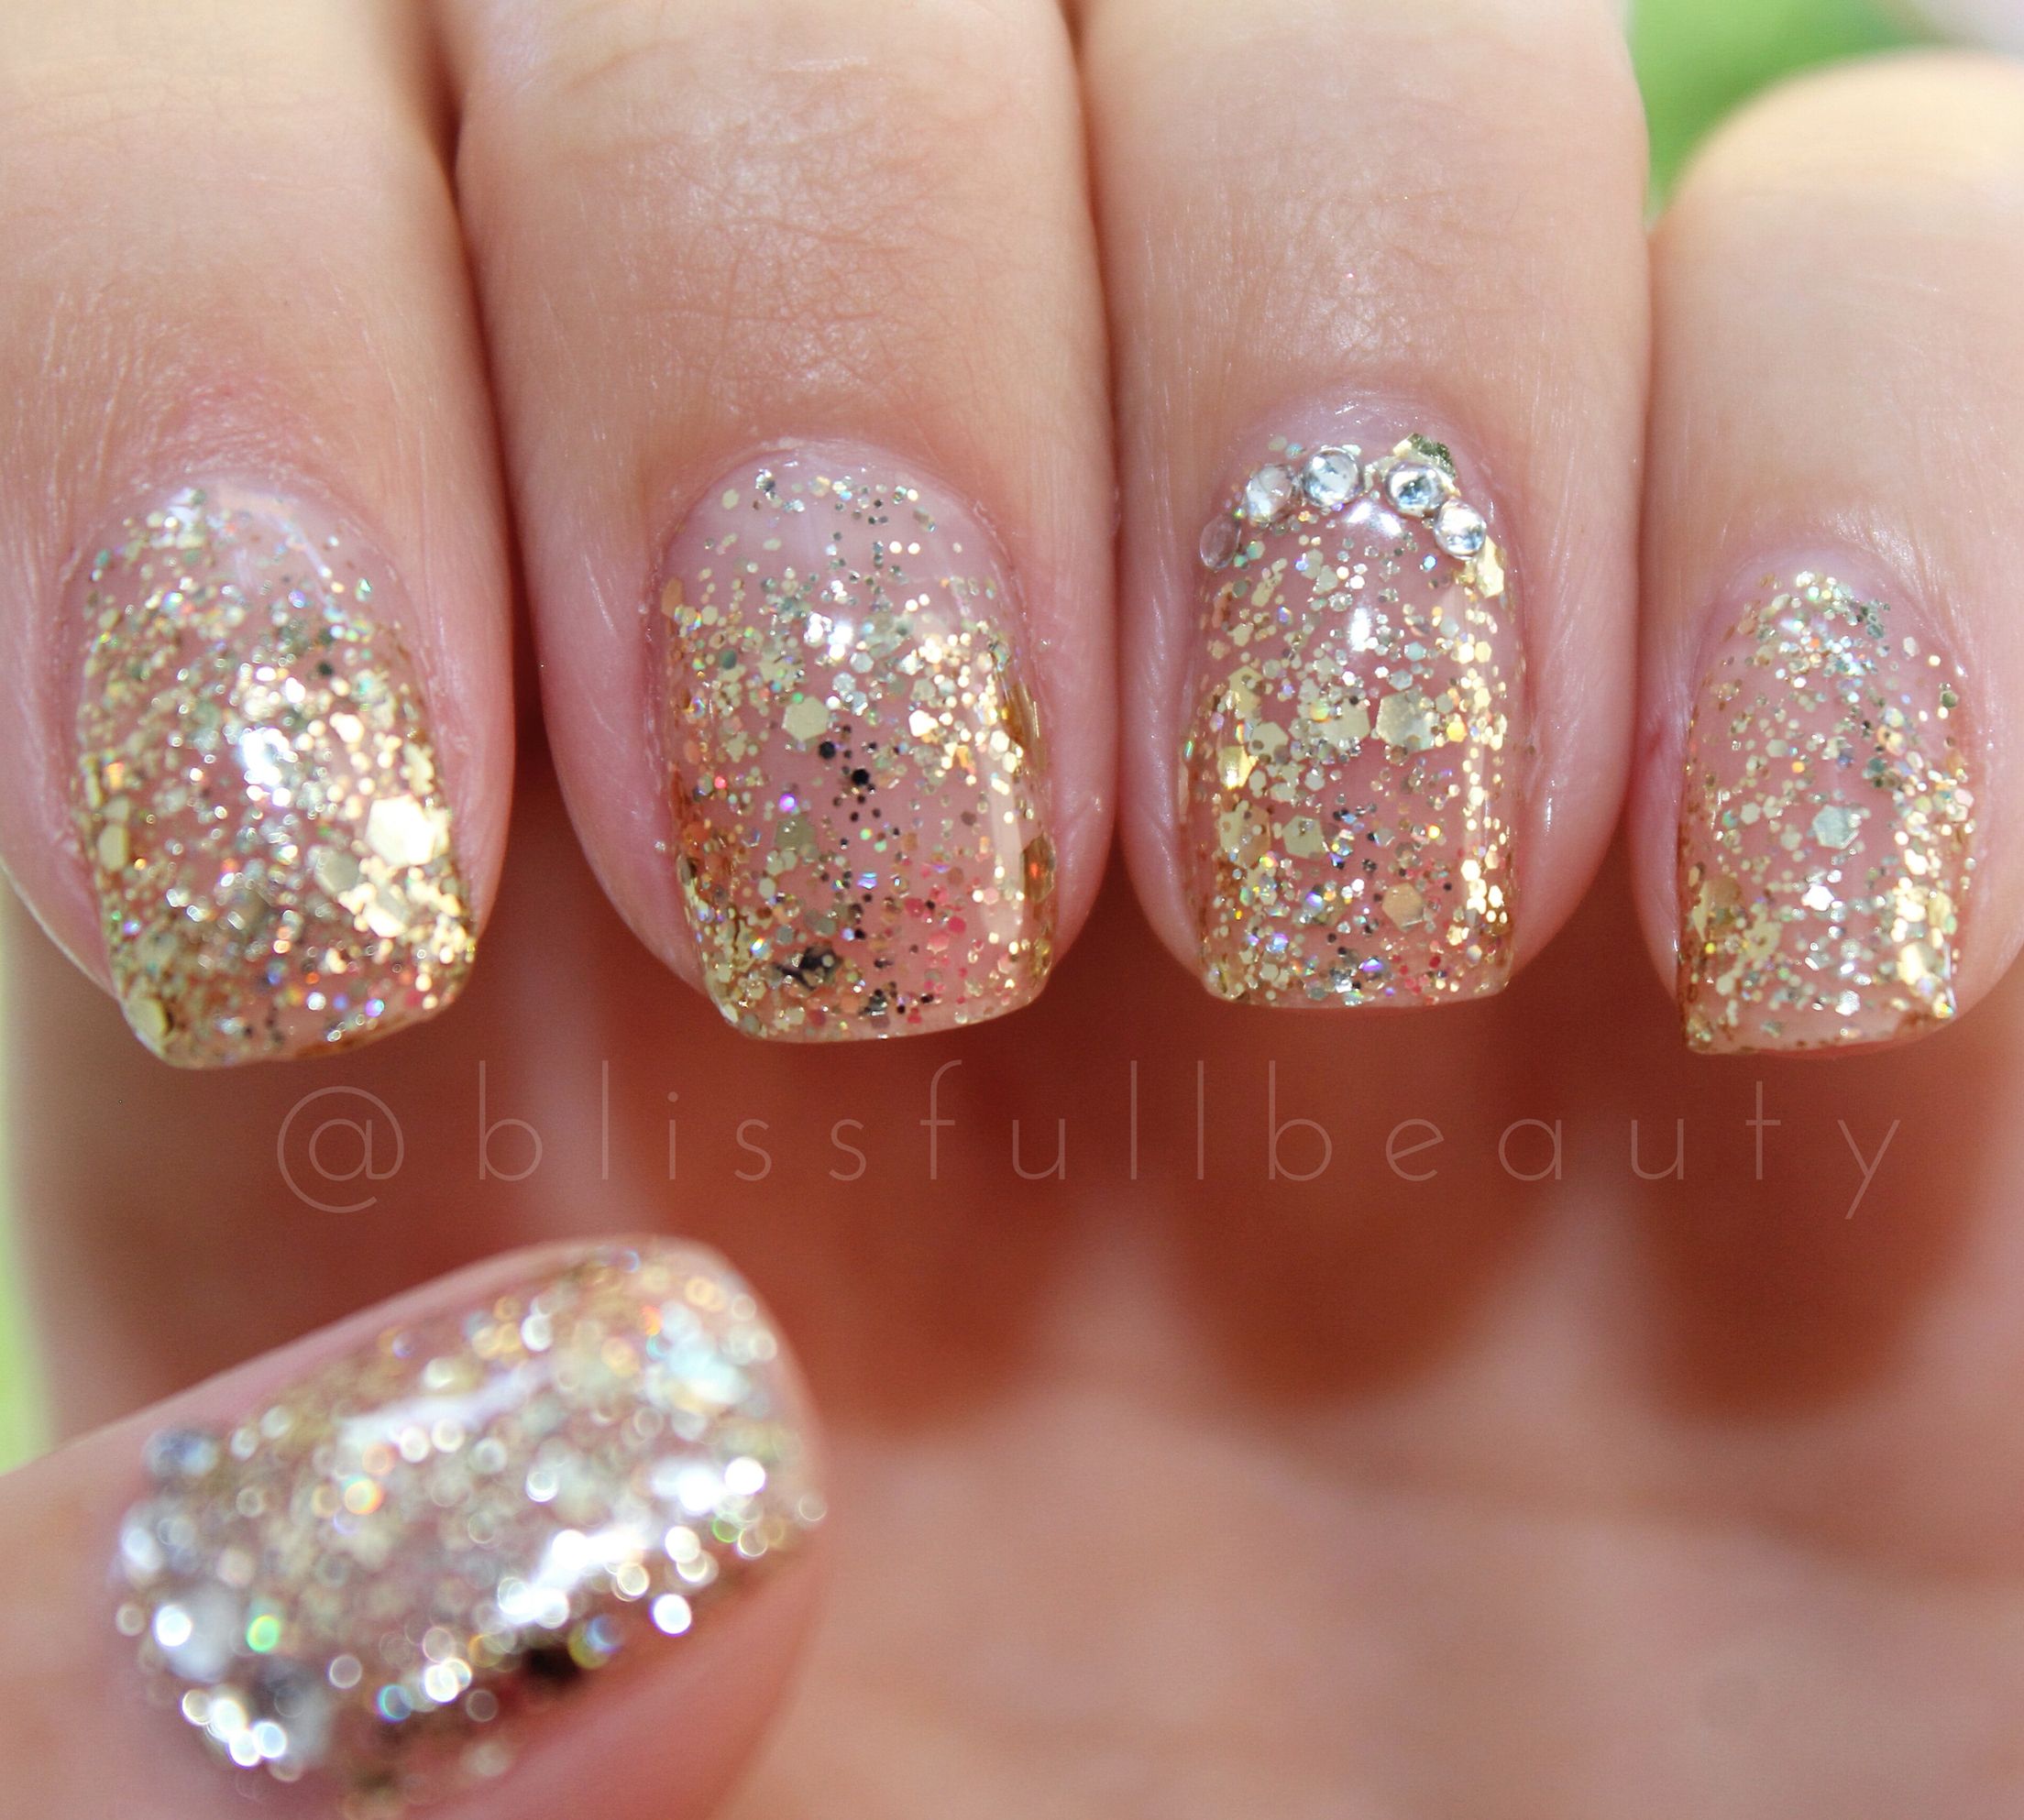 Gelish all that glitters is gold - instagram@blissfullbeauty | Nails ...